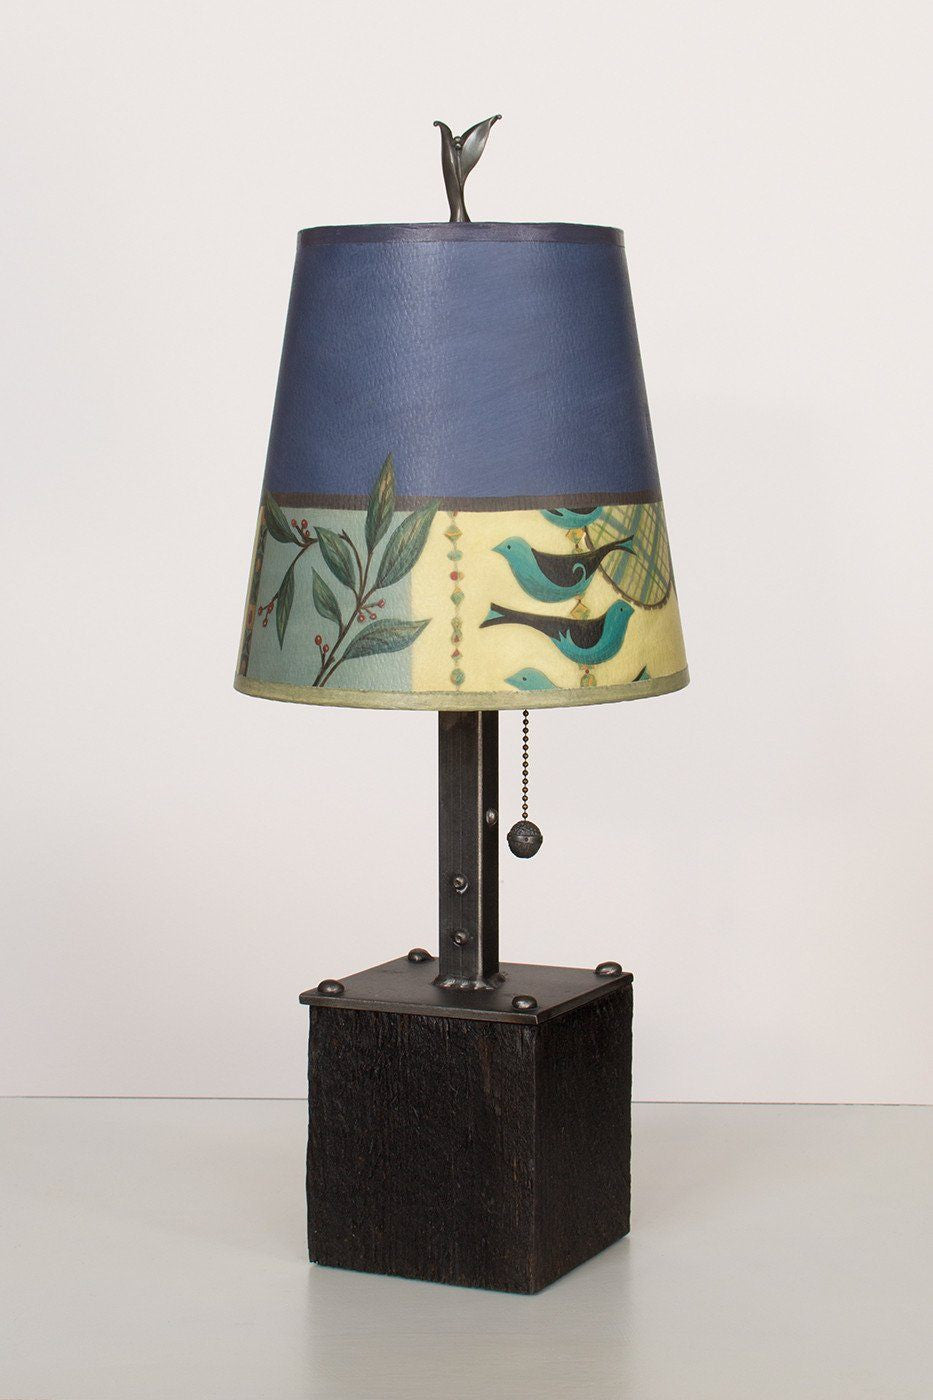 Janna Ugone & Co Table Lamps Steel Table Lamp on Reclaimed Wood with Small Drum Shade in New Capri Periwinkle